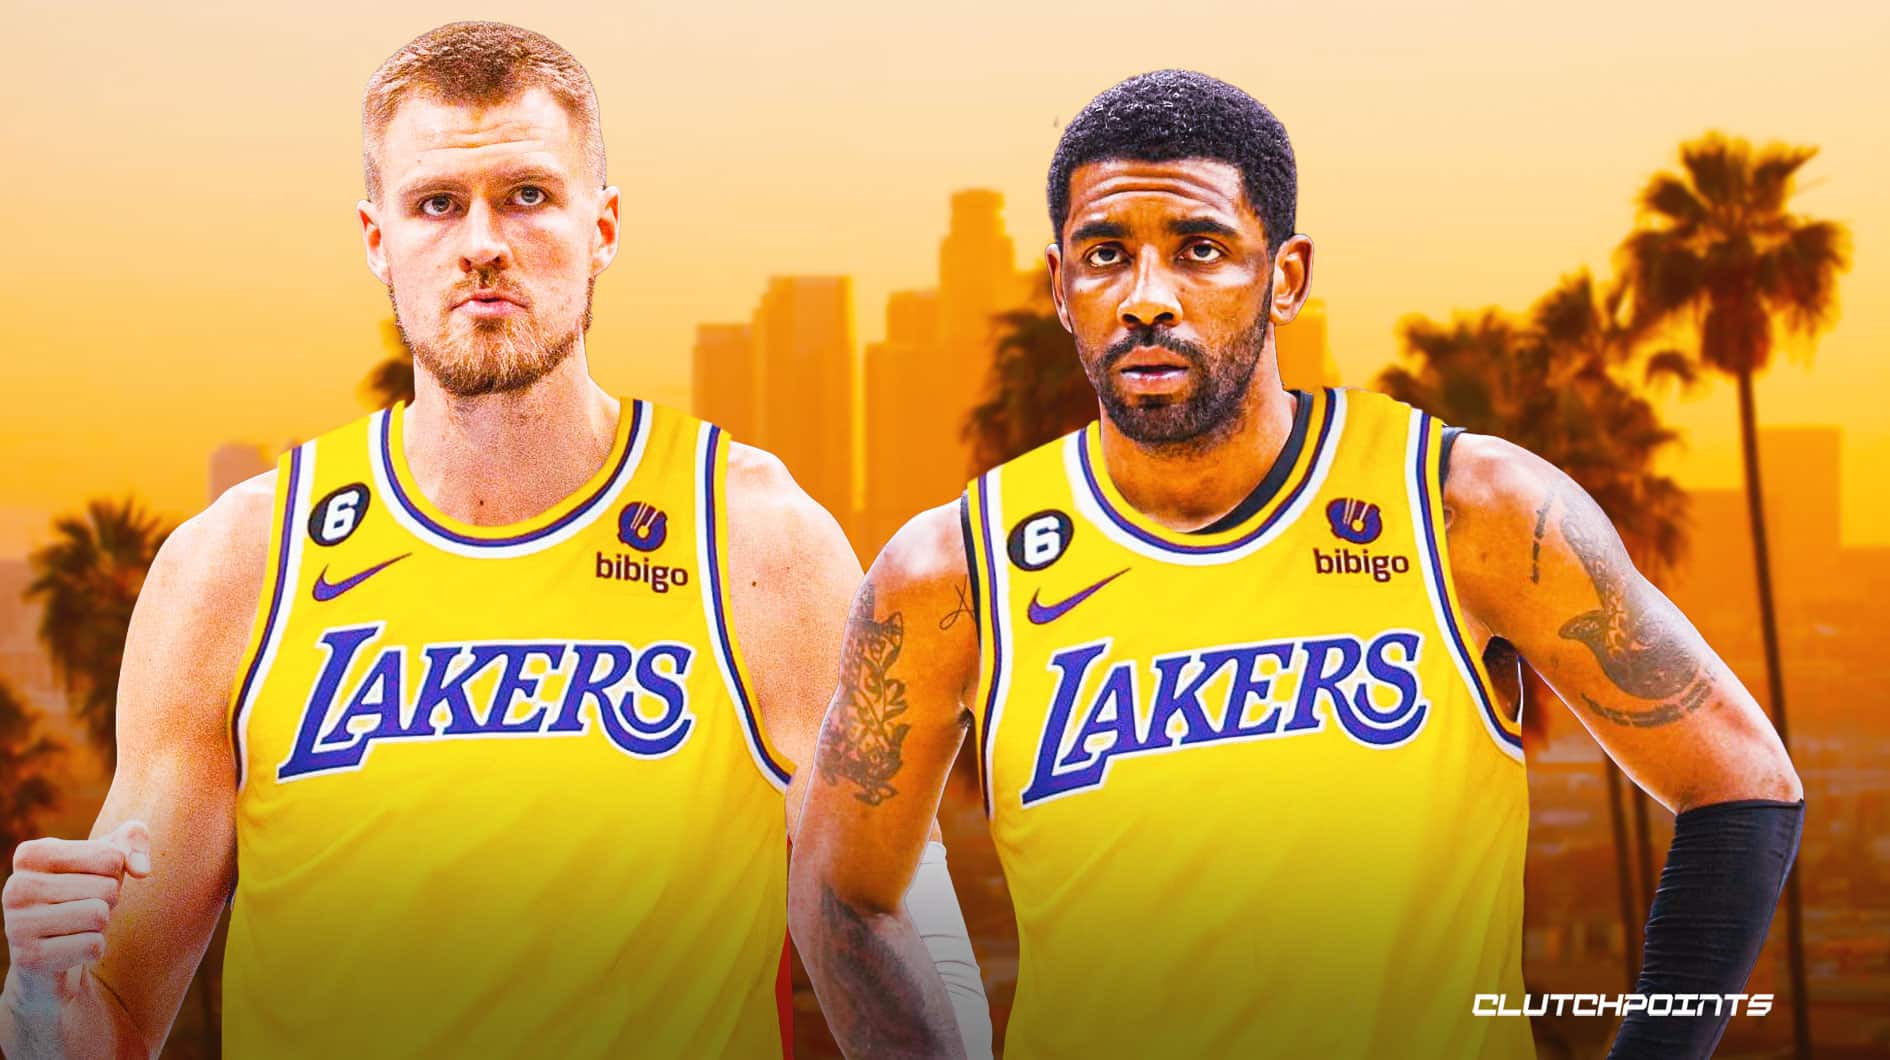 Lakers NBA free agency players LA must avoid signing